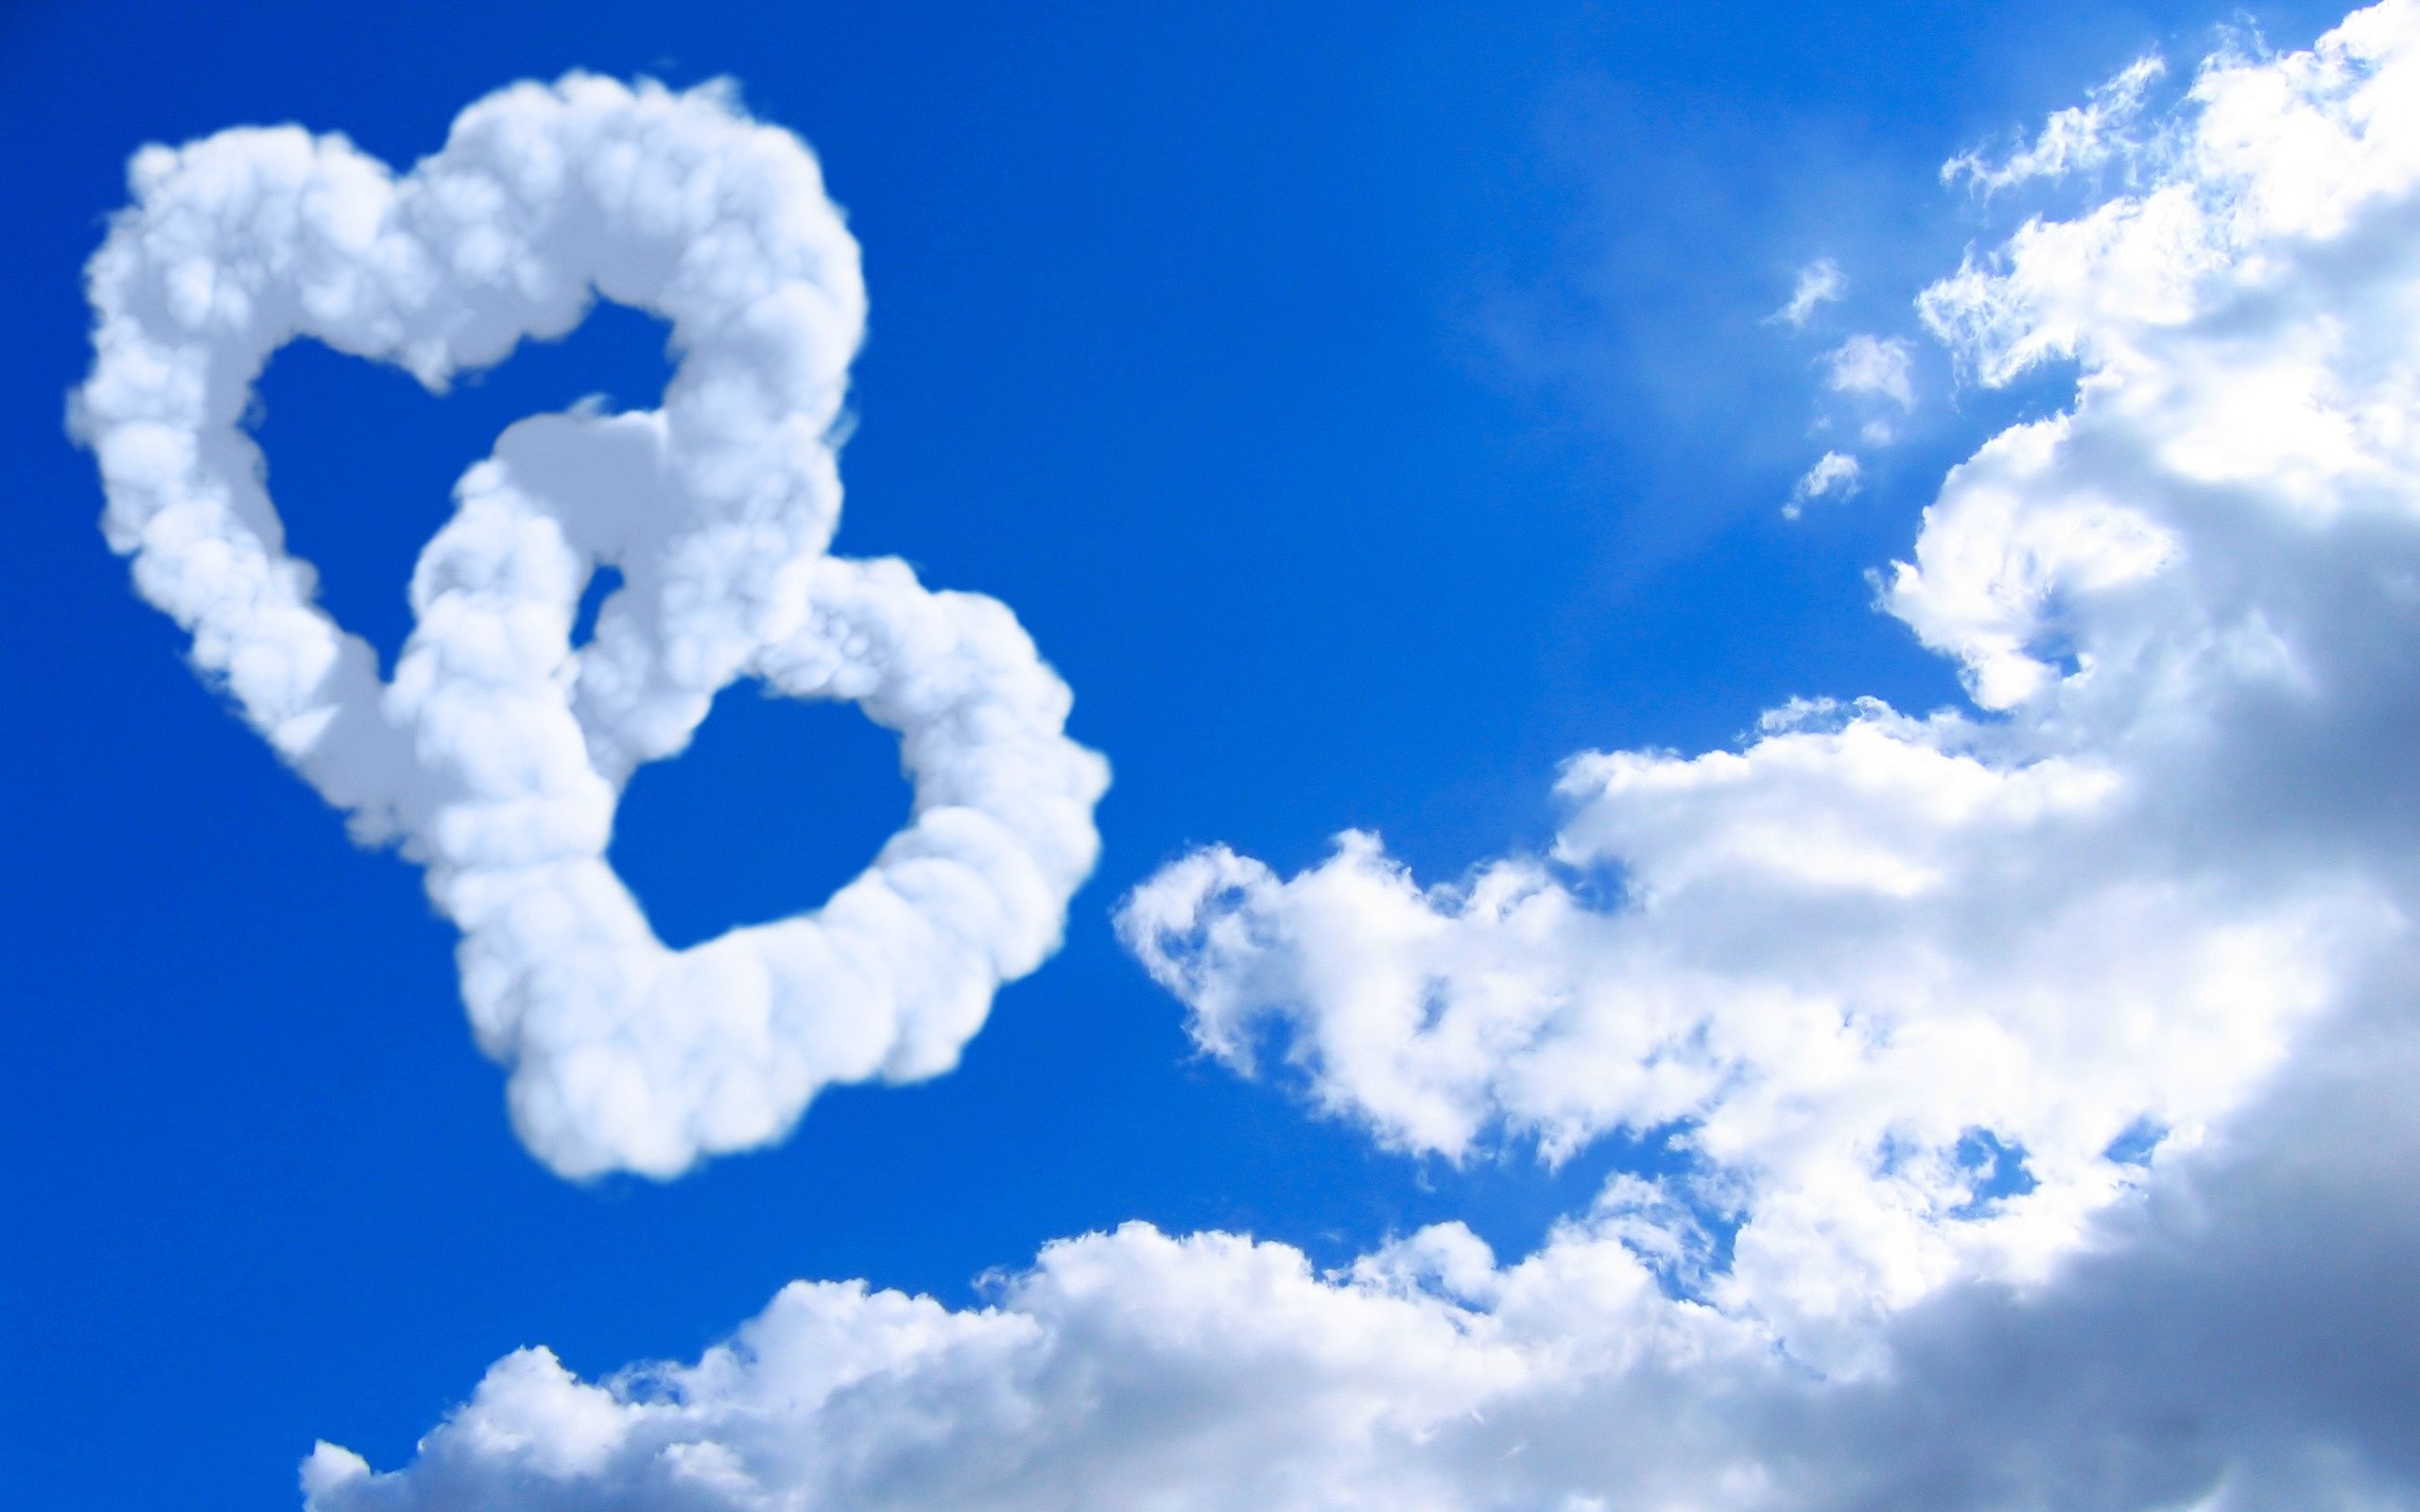 Hearts in Clouds Wallpapers | HD Wallpapers